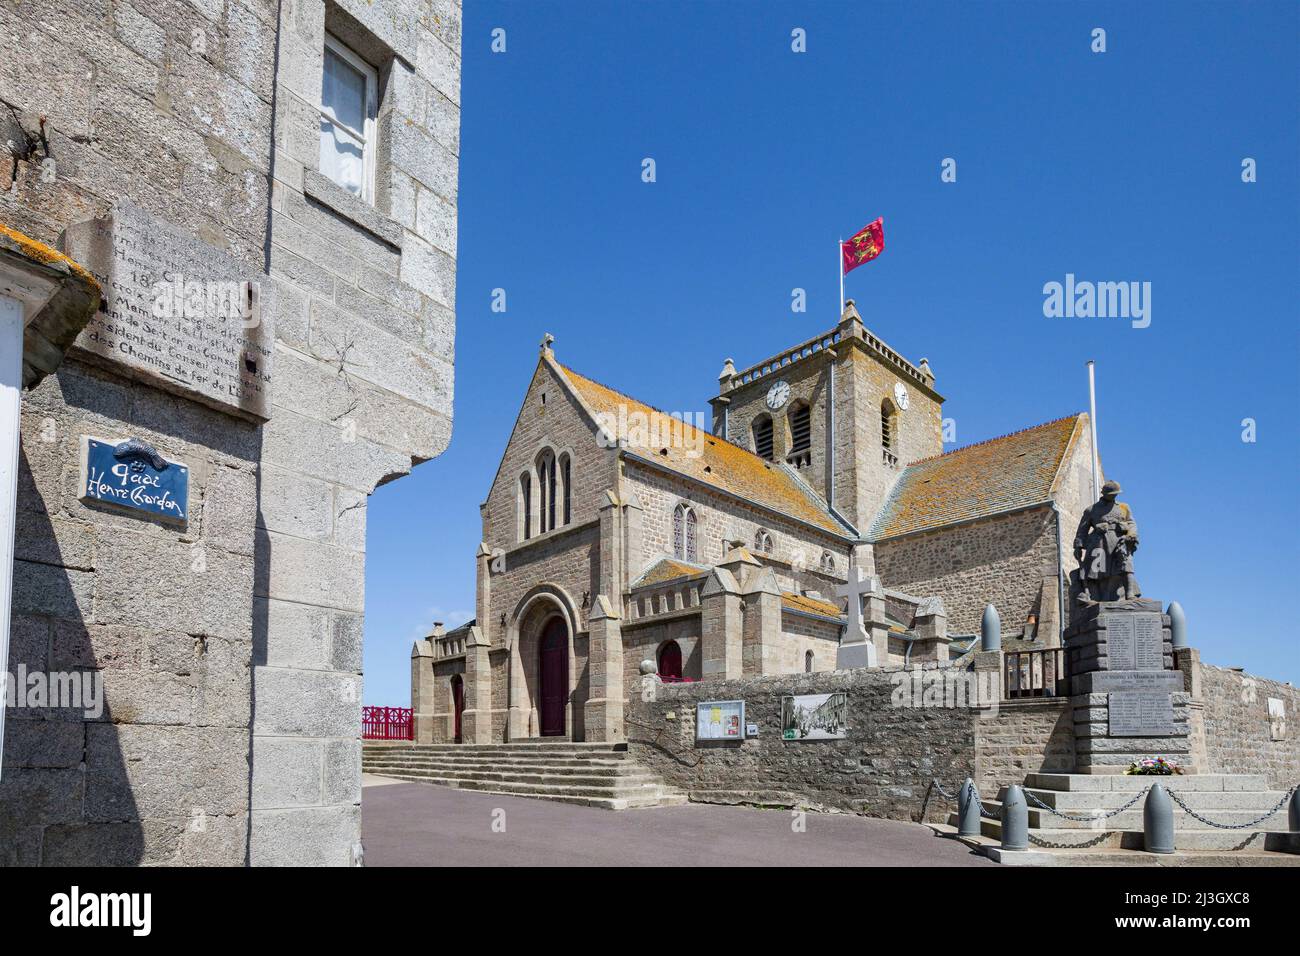 France, Manche, Cotentin, Barfleur, labeled Les Plus Beaux Villages de France, Saint-Nicolas church, First World War Memorial monument and plaque in tribute to Henri Chardon, president of the Council of the State railway network from 1913 to 1937 Stock Photo